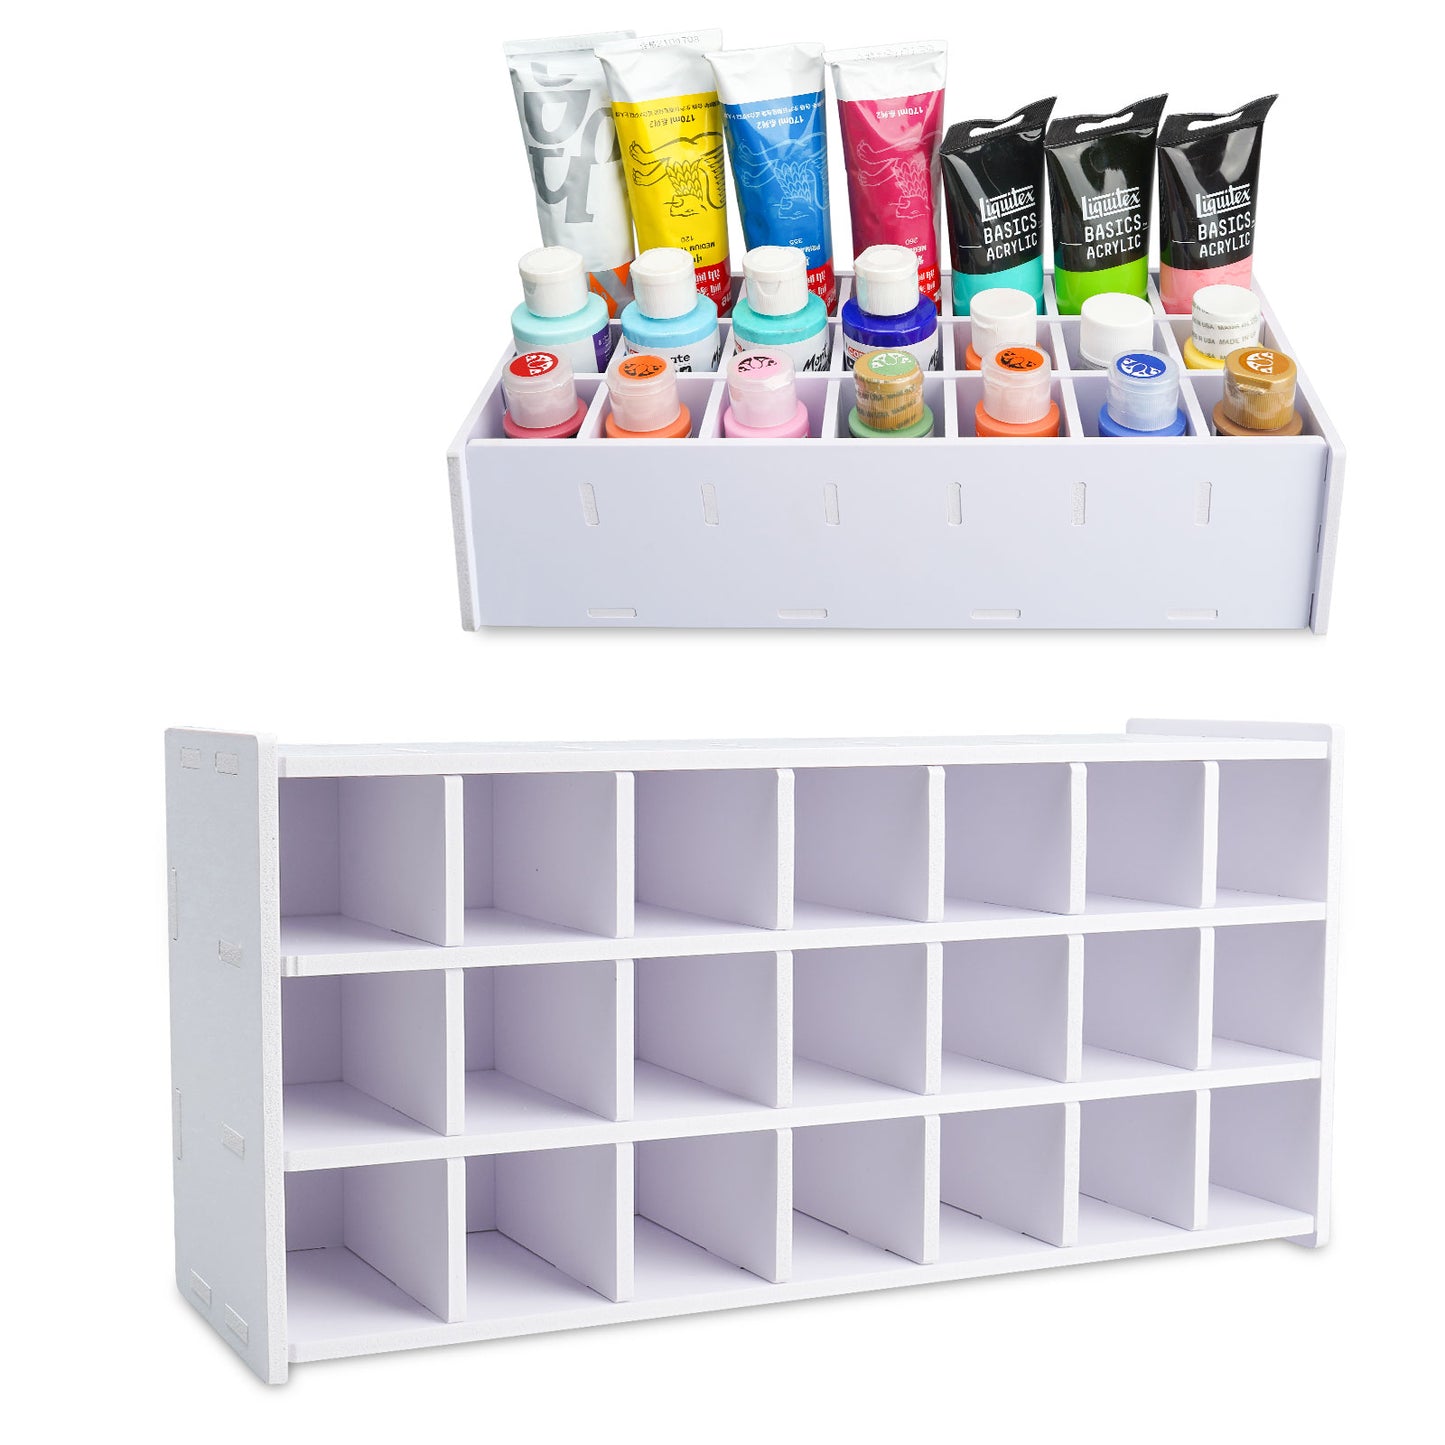 Acrylic Paint Organizer, Paint Rack Stand for 45 Bottles of Paints